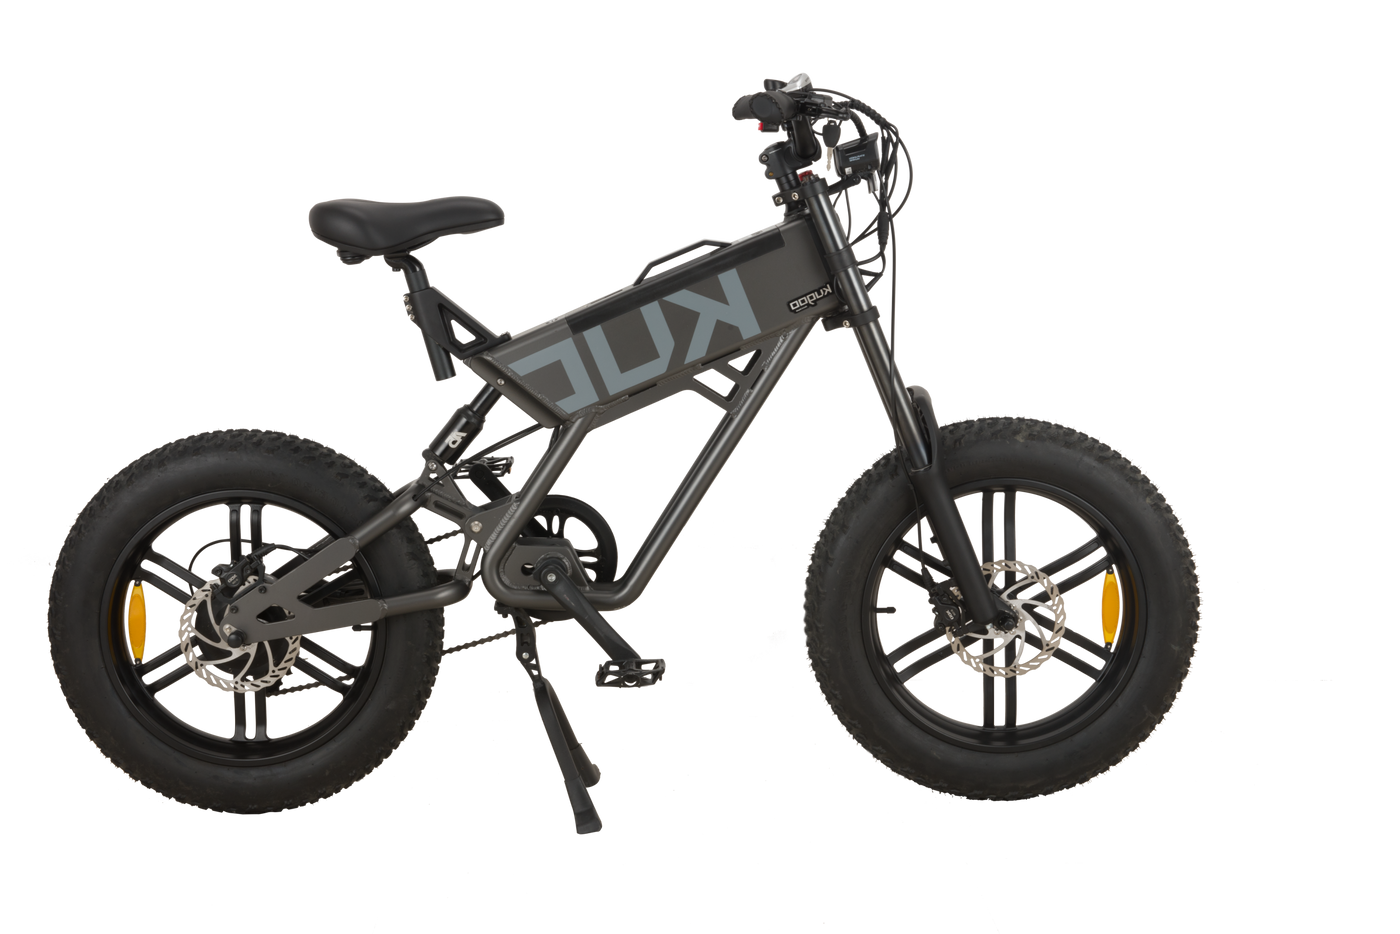 KUGOO T01 750W 20inch Removable Battery Electric Bicycle